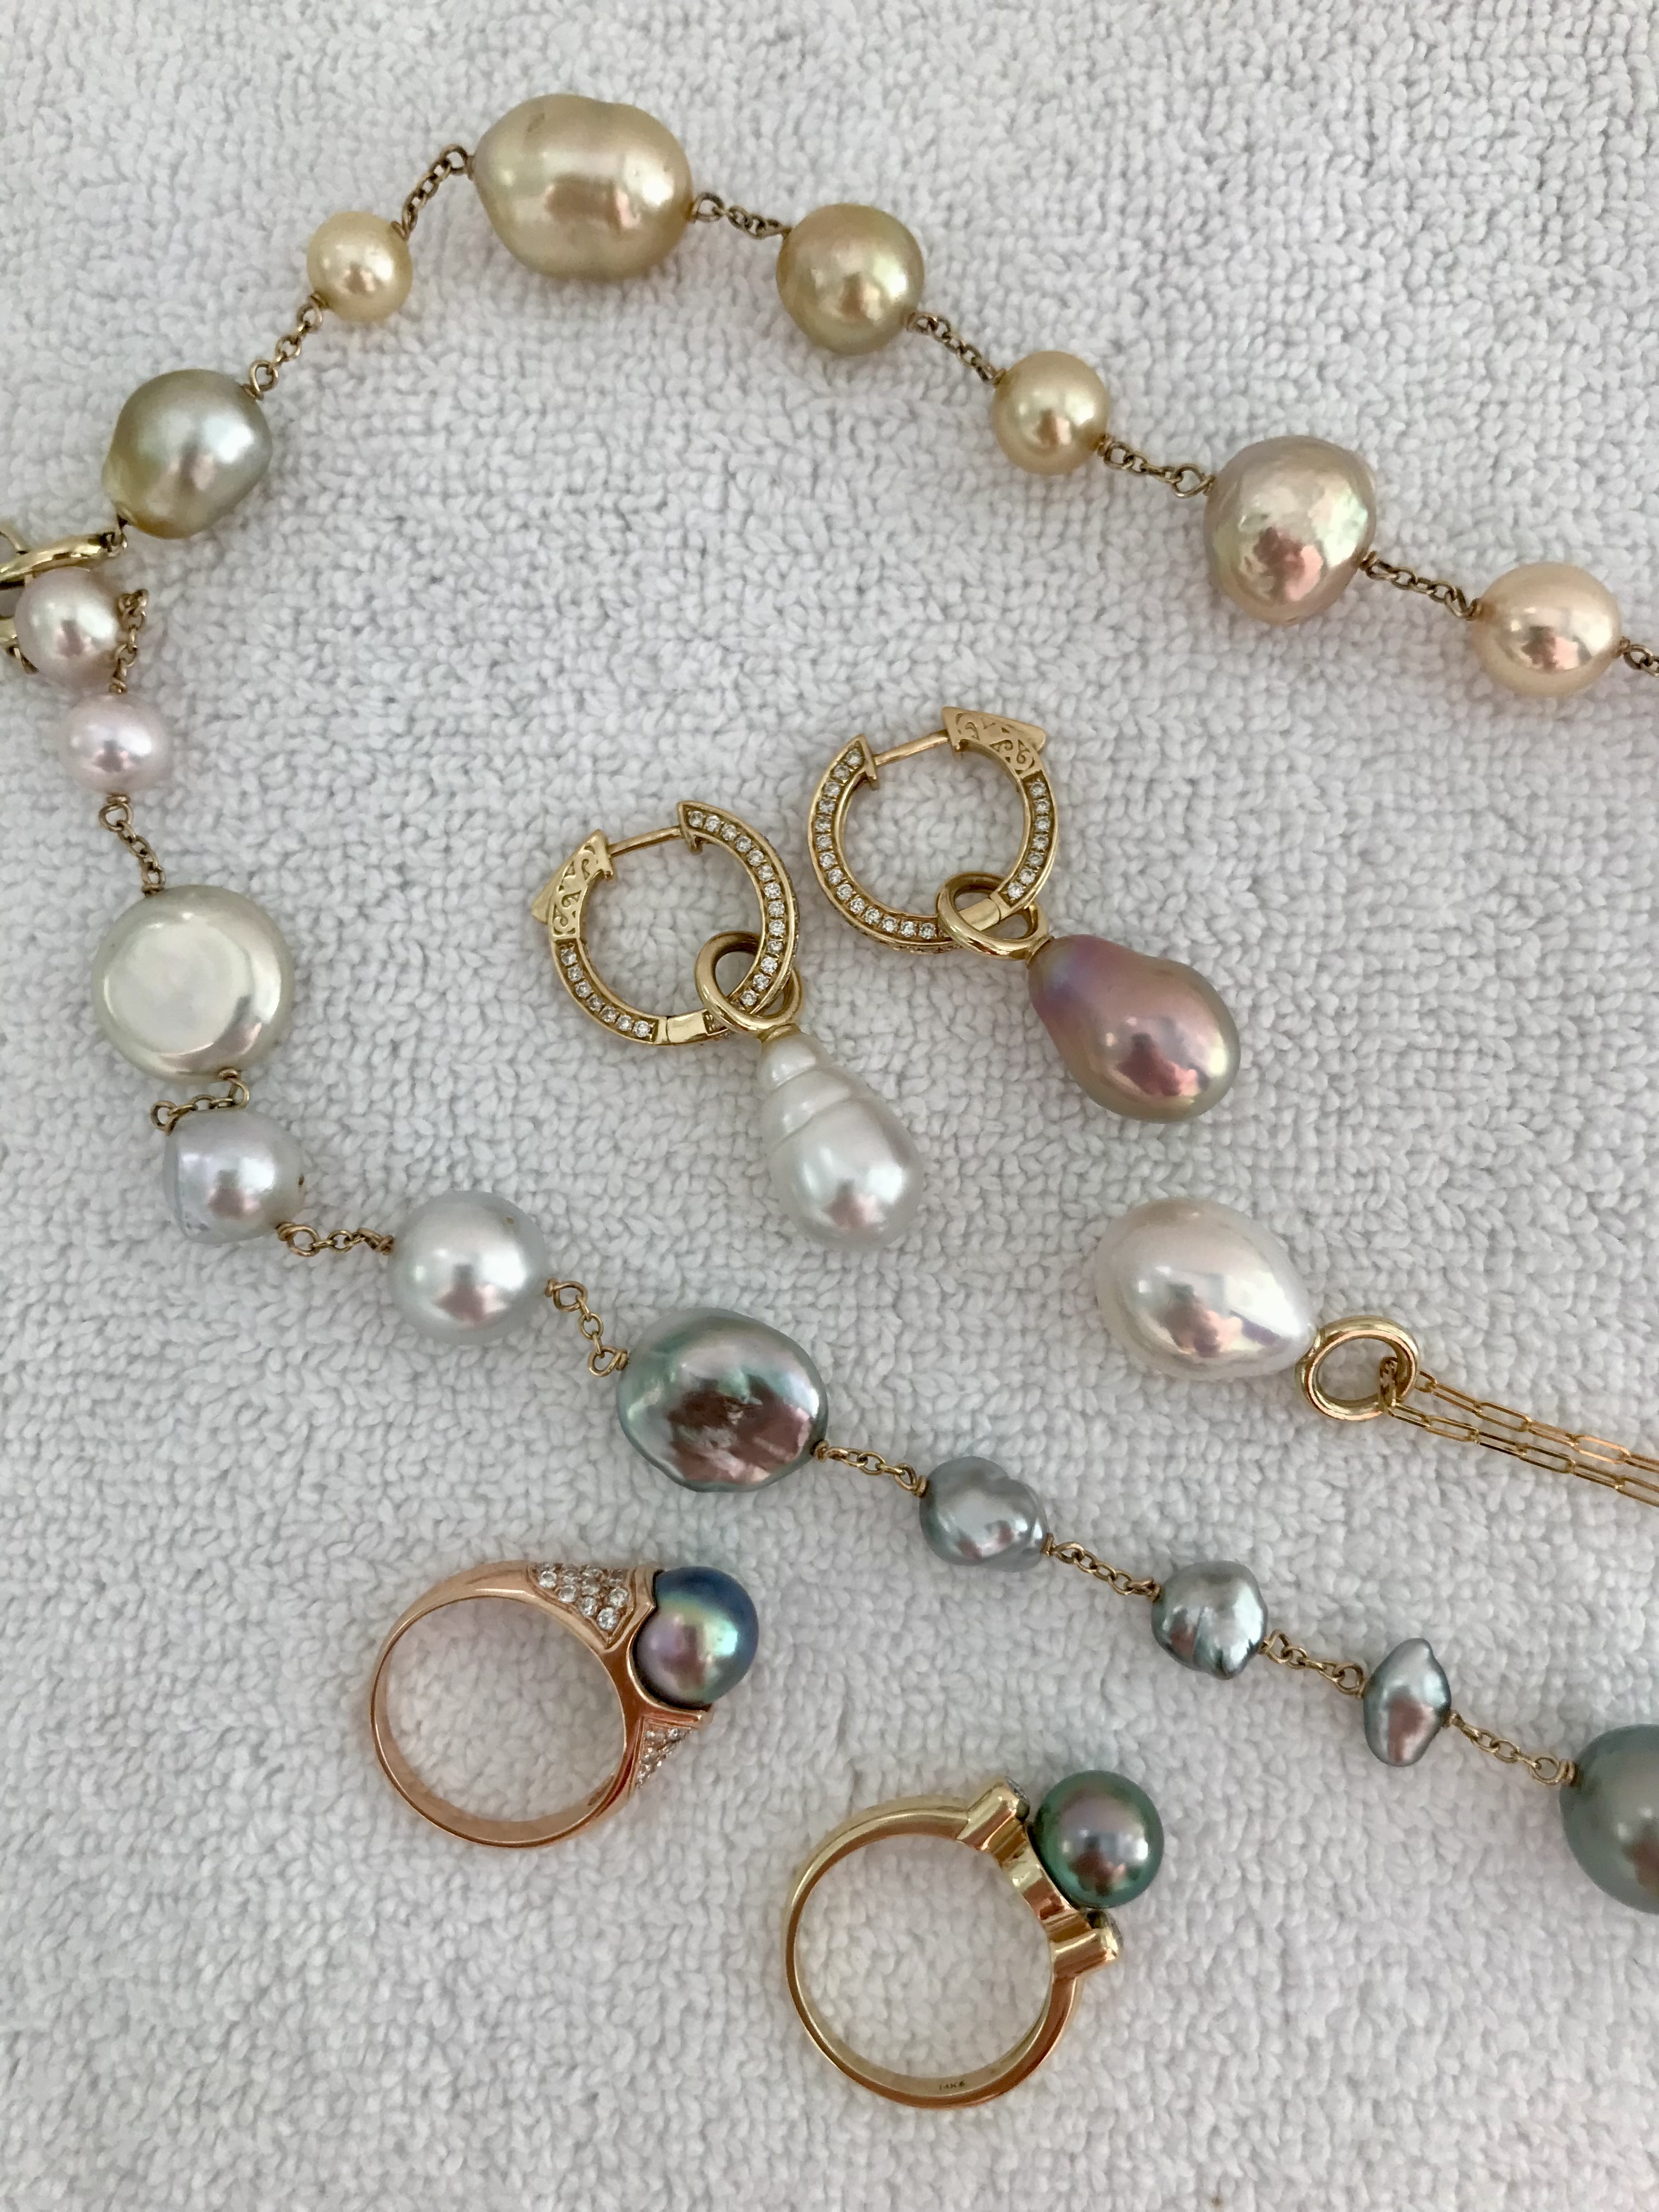 Ombre' tin-cup, The Queen pendant, Winter Snowman and Summer Rain pendants on earring hoops Sea of Cortez pearl from Douglas in the Pearl Paradise rose gold ring setting, and a Tahitian yellow gold ring from Kamoka